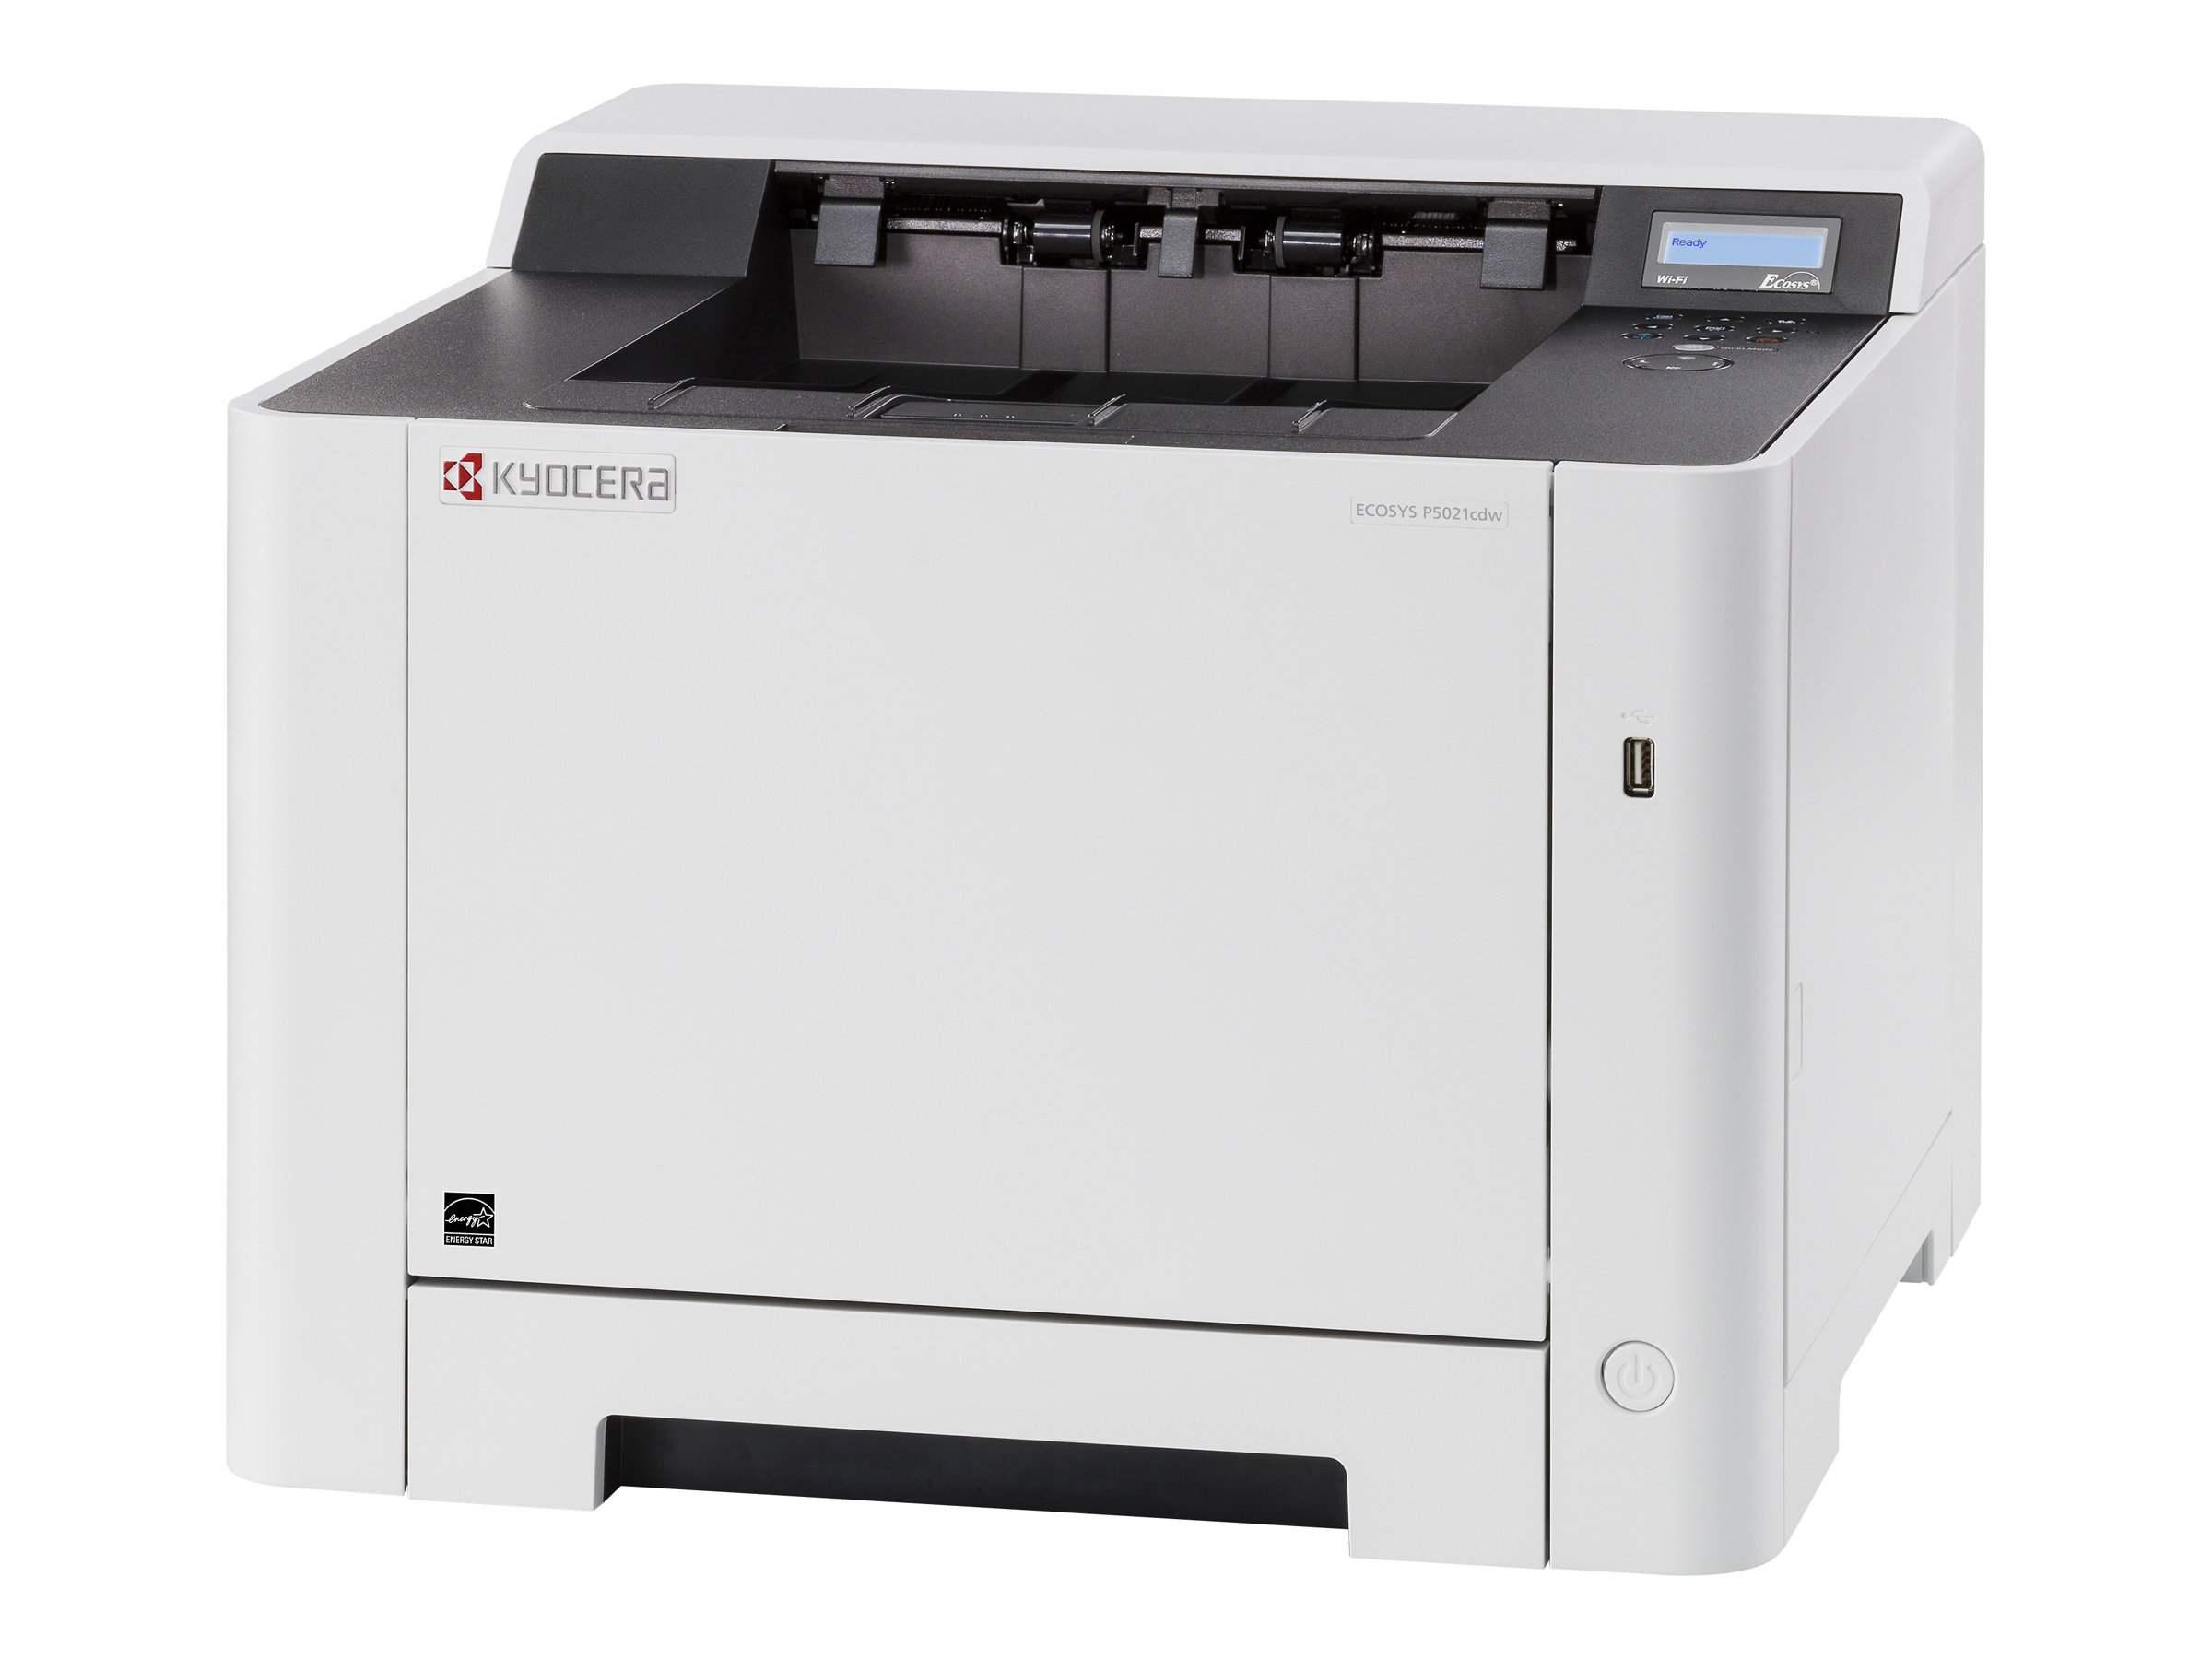 Kyocera ECOSYS P5021cdw - Printer - color - Duplex - laser - A4/Legal - 9600 x 600 dpi - up to 21 ppm (mono) / up to 21 ppm (color) - capacity: 300 sheets - USB 2.0, Gigabit LAN, USB host, Wi-Fi - image 1 of 4